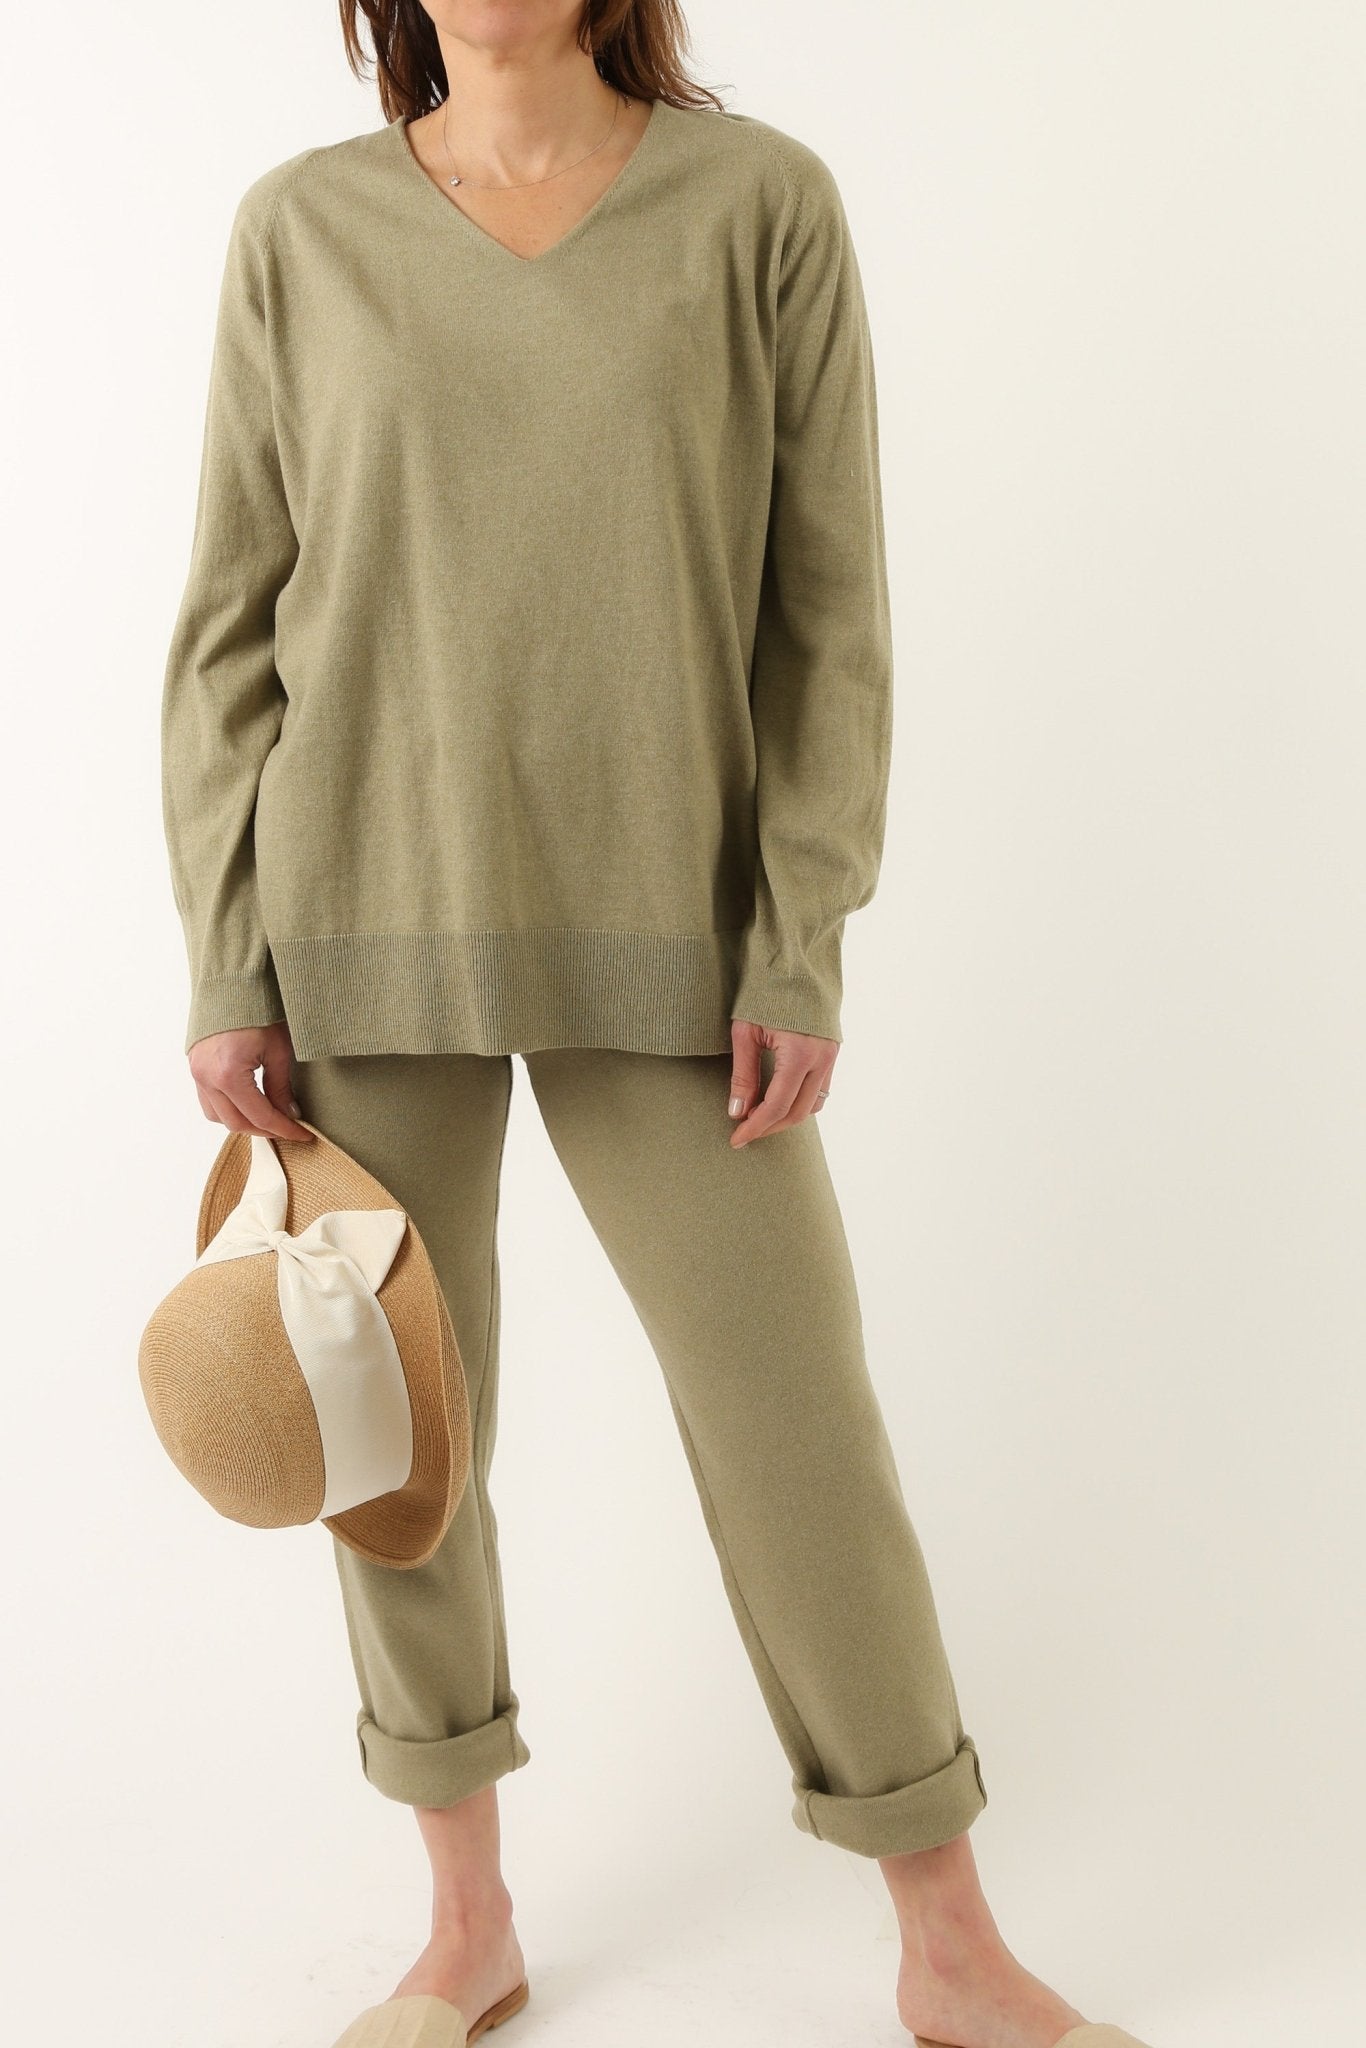 PAIGE PANT IN DOUBLE KNIT HEATHERED PIMA COTTON IN GREEN HEATHER - Jarbo